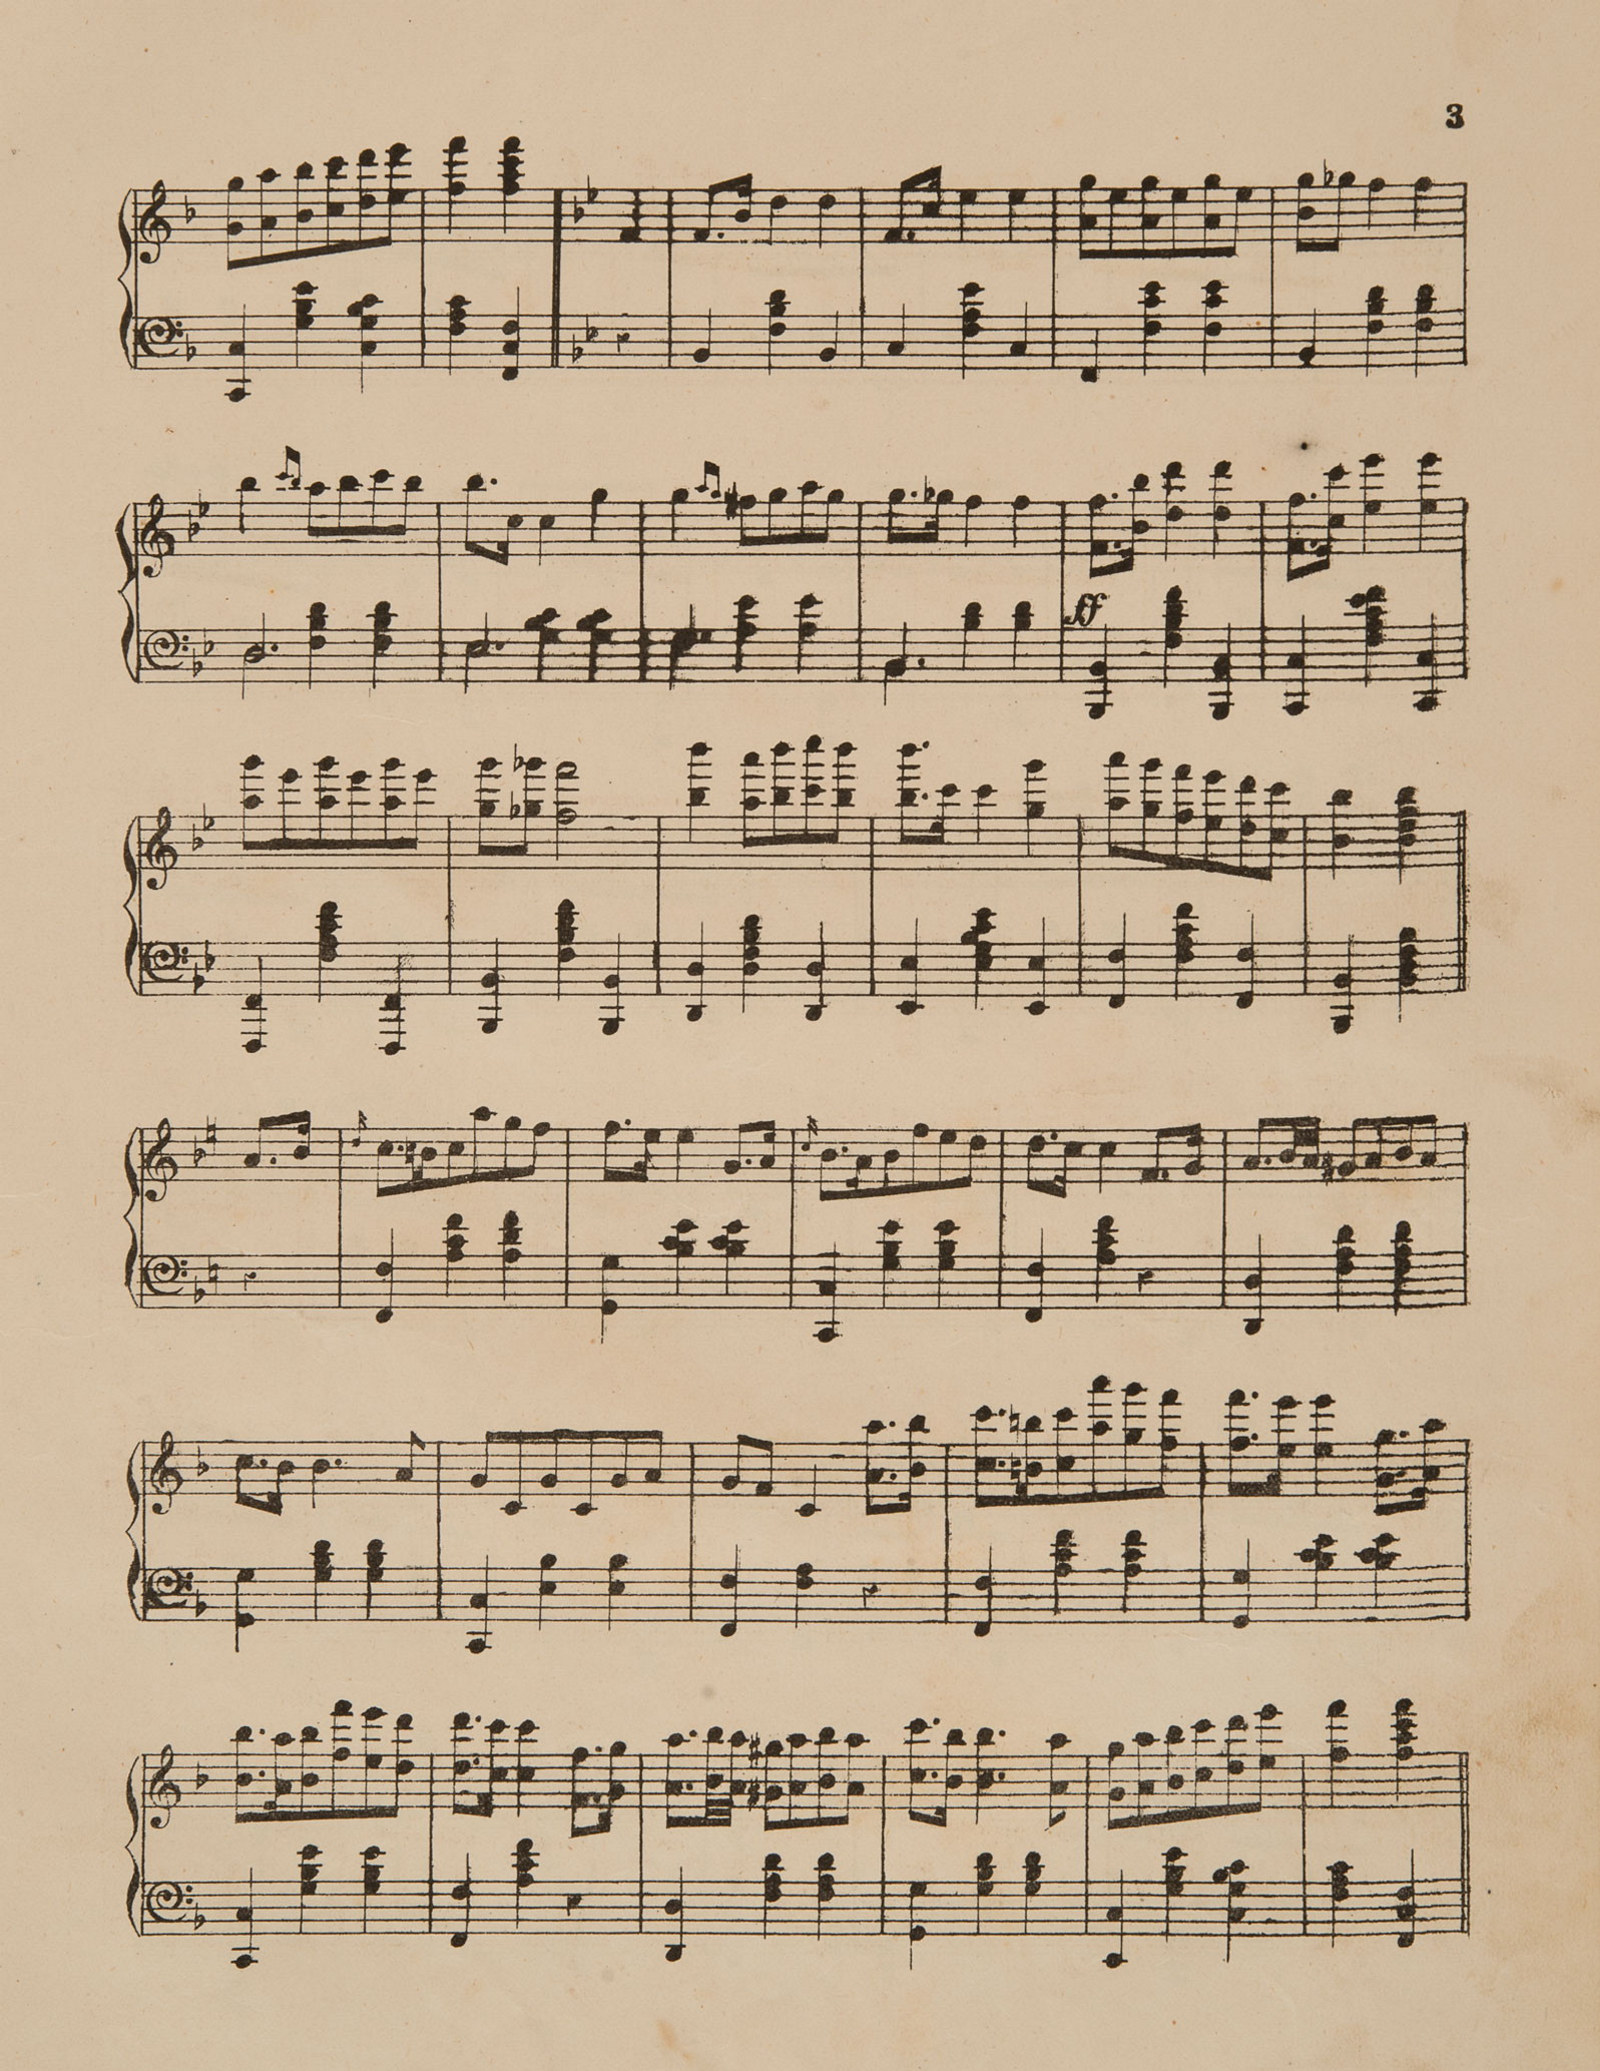 Sheet music, 'The Barham Mazurka', composed by Louise N, page 3, published 1876